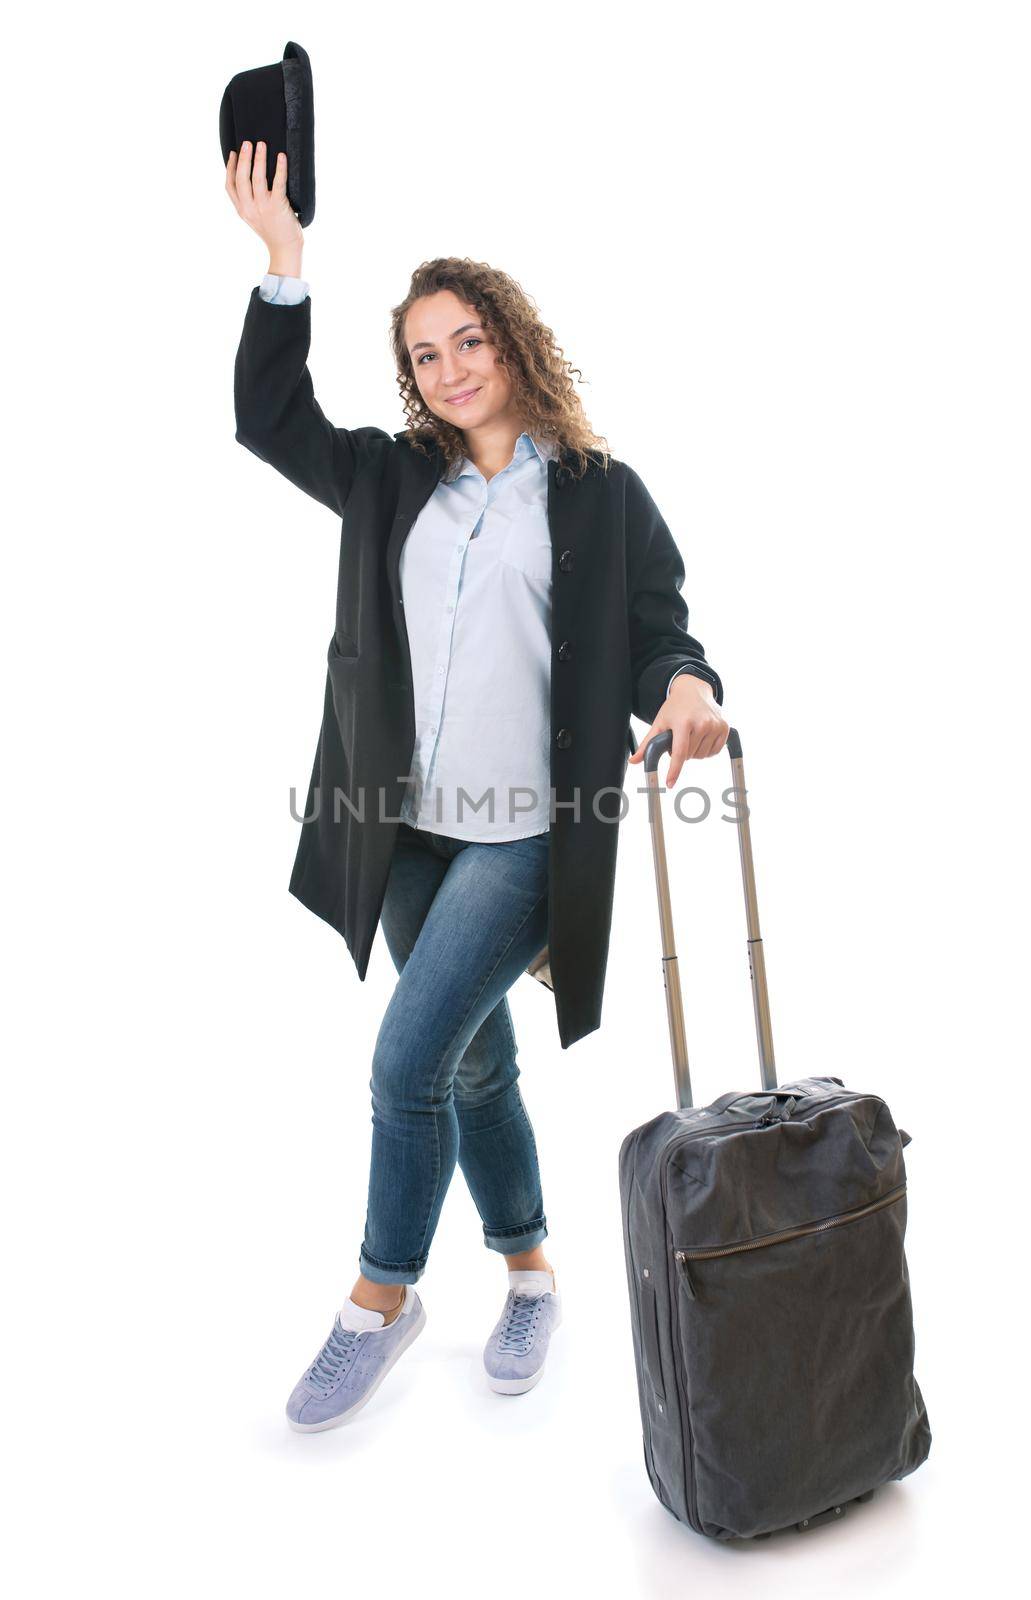 tourism, vacation, young girl with travel bag, ticket and passport on a white background.